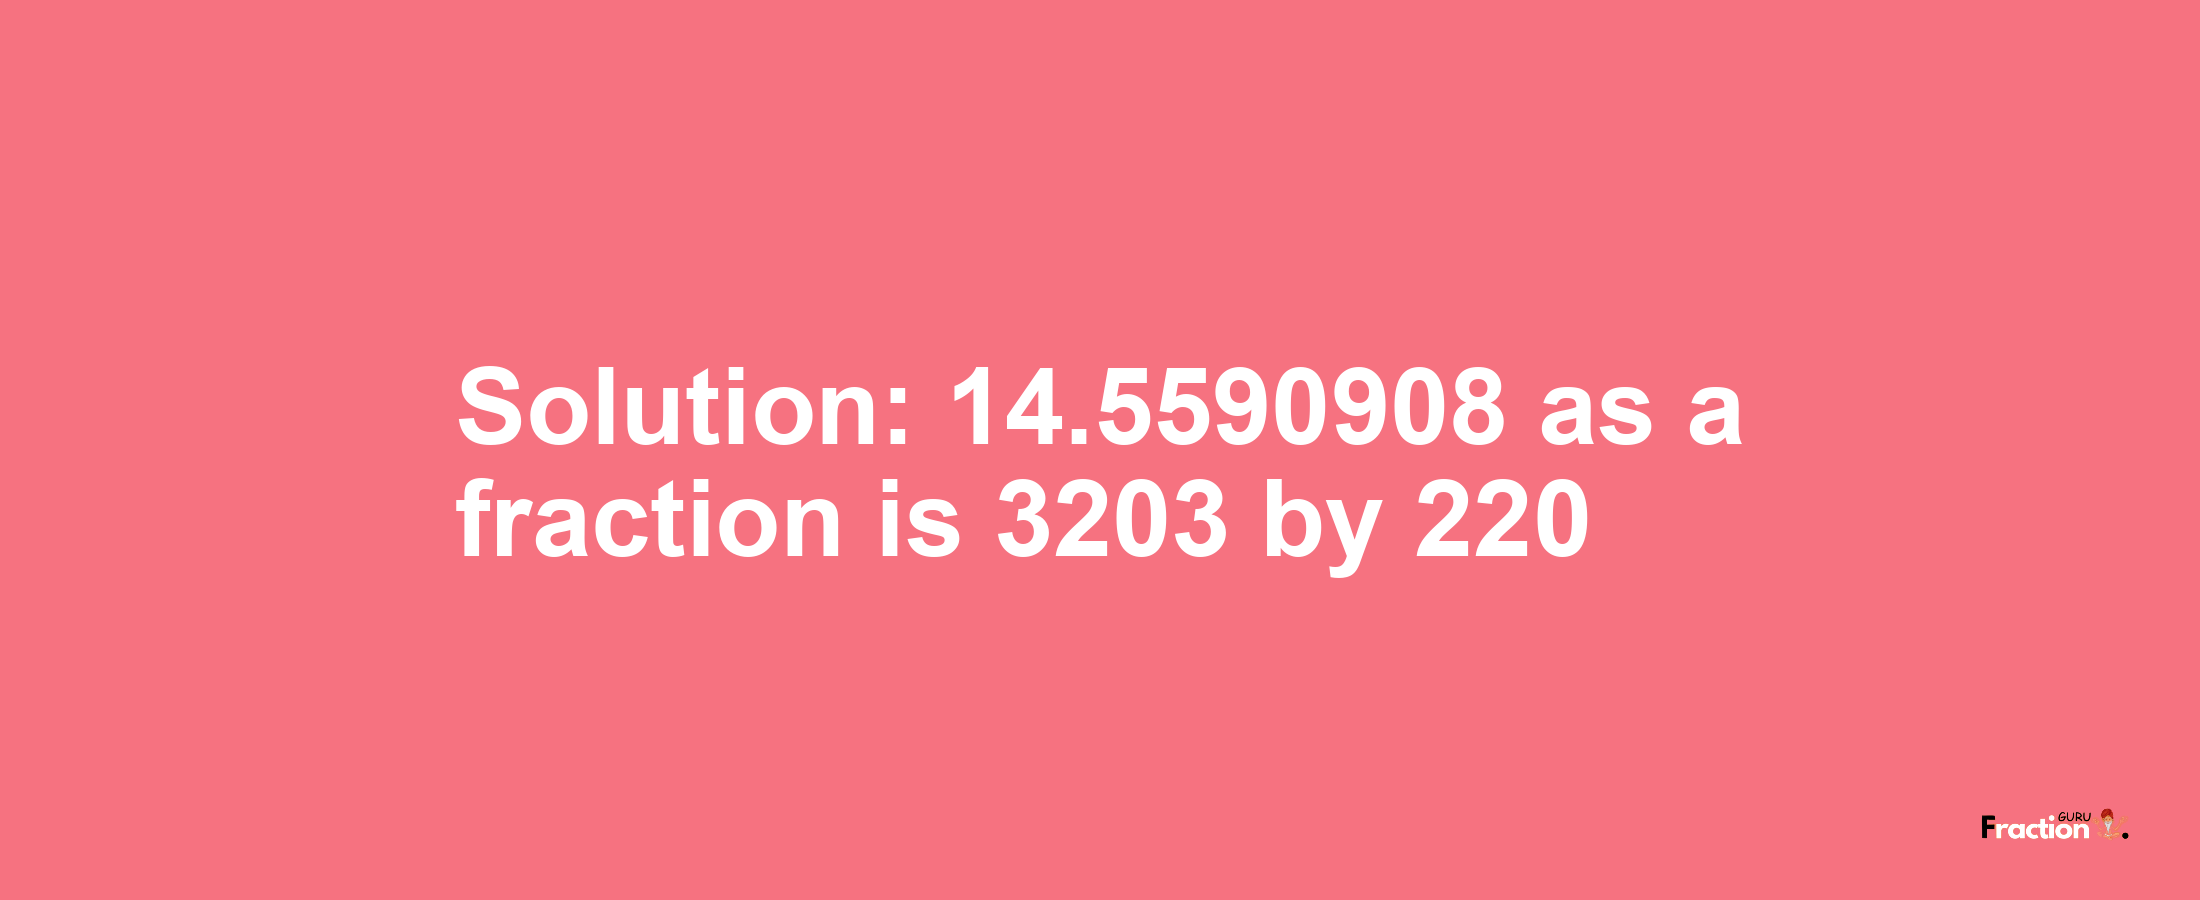 Solution:14.5590908 as a fraction is 3203/220